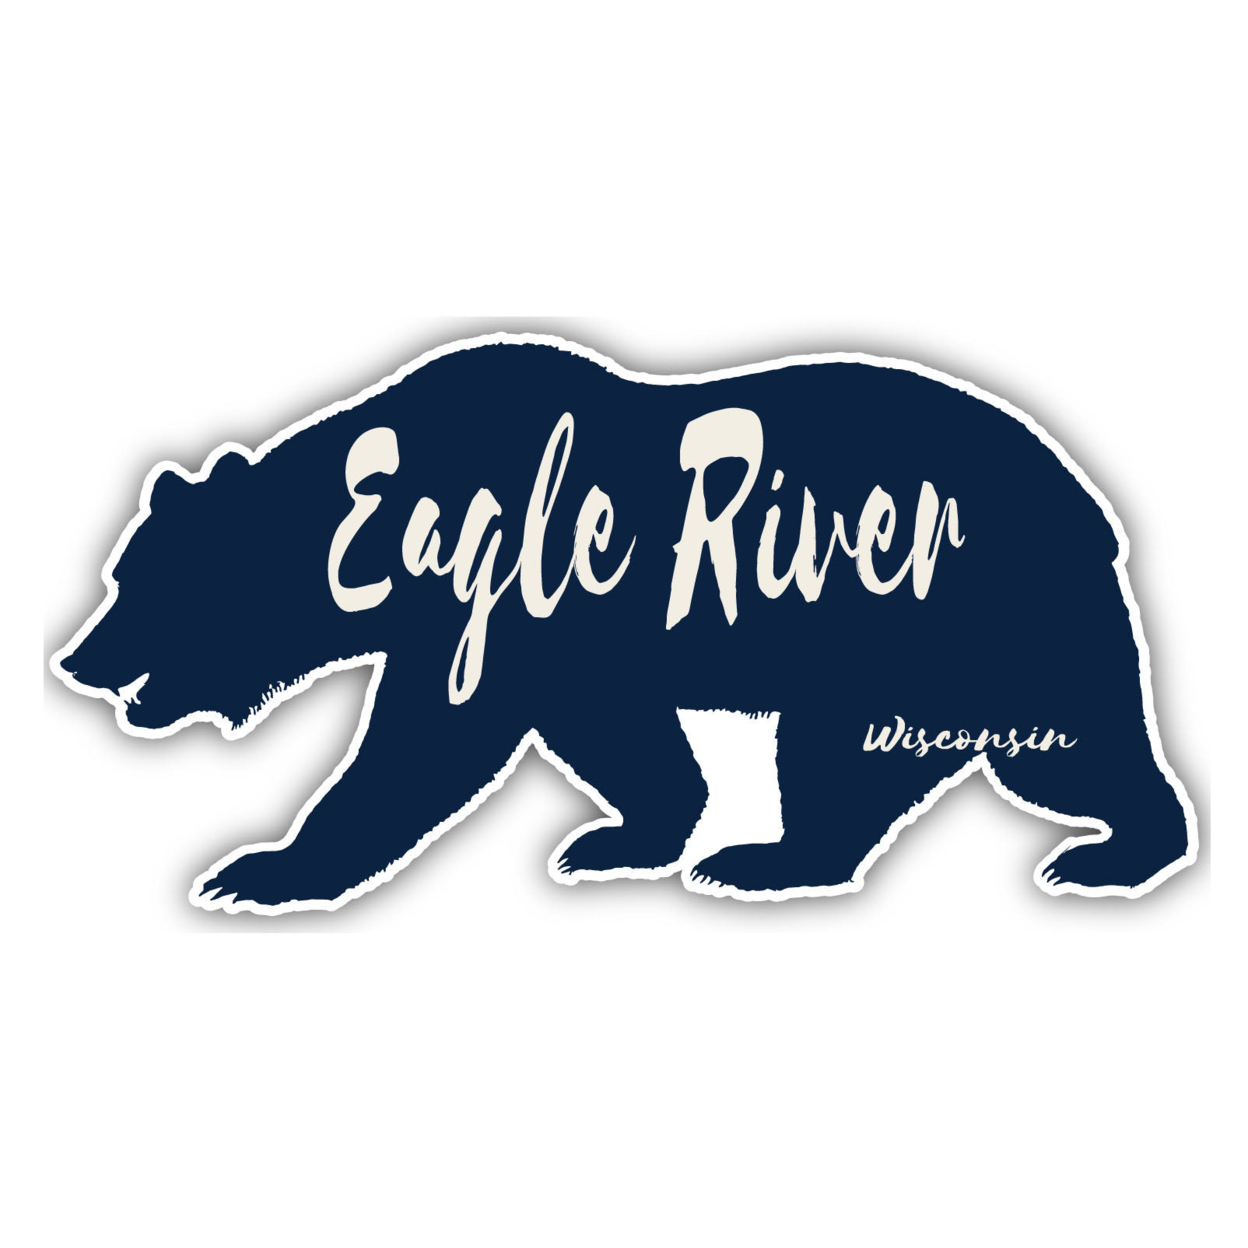 Eagle River Wisconsin Souvenir Decorative Stickers (Choose Theme And Size) - 4-Pack, 10-Inch, Bear